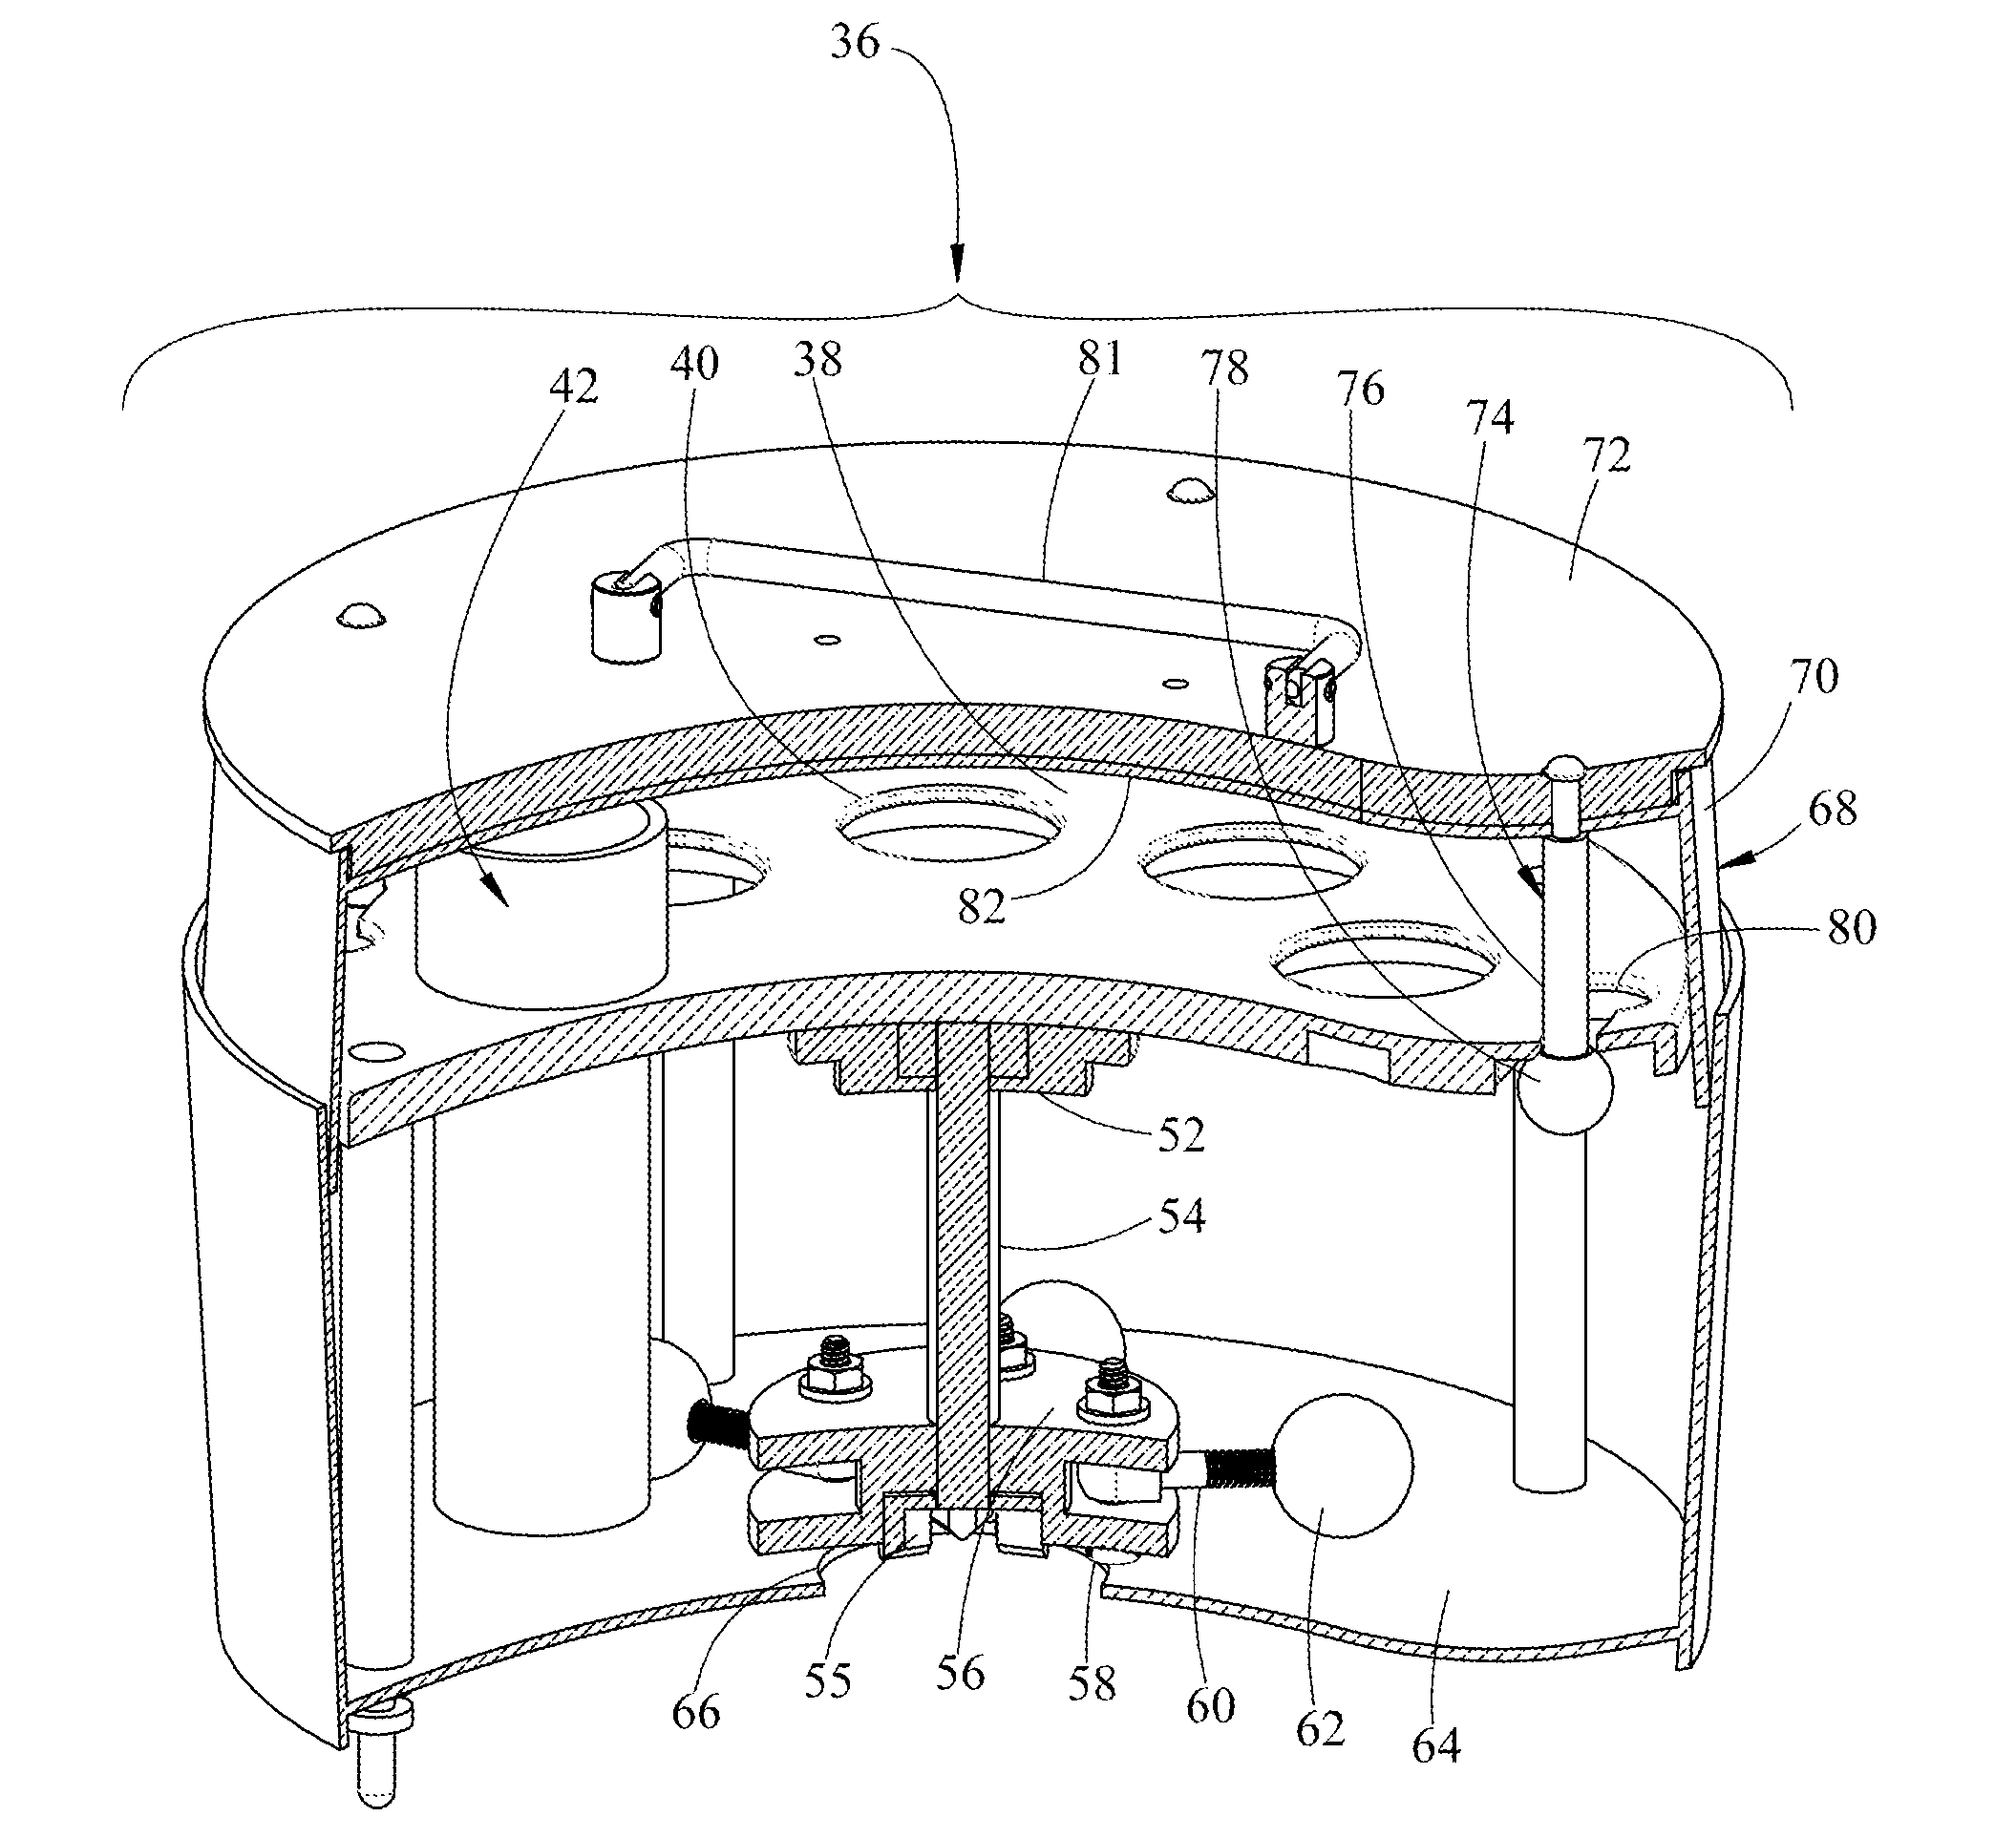 Agitation Apparatus with Interchangeable Module and Impact Protection Using Reactive Feedback Control